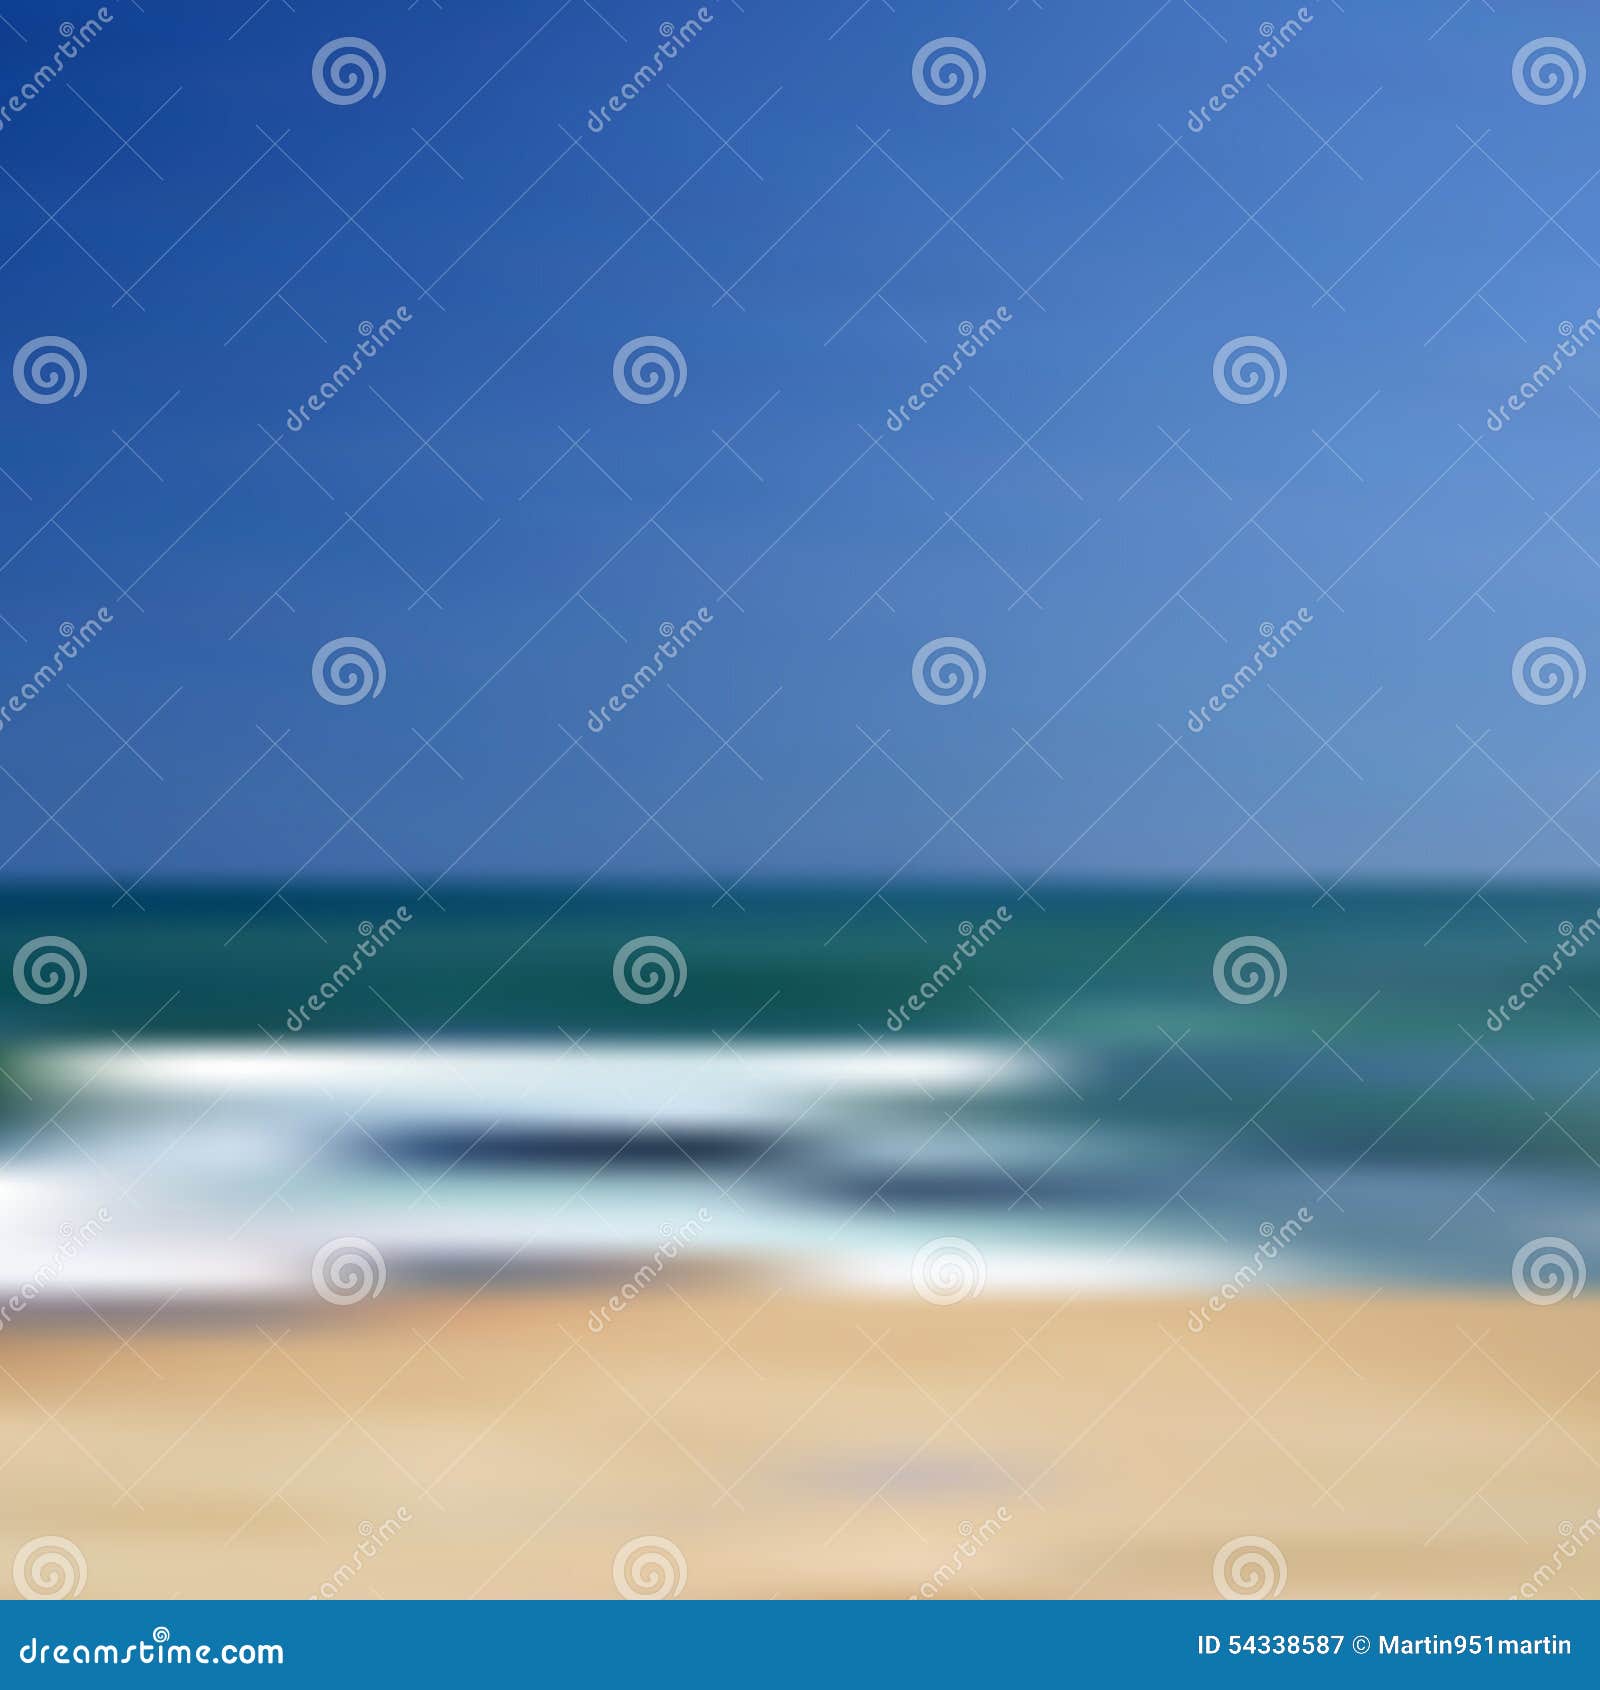 abstract blurred unfocused beach  background eps10